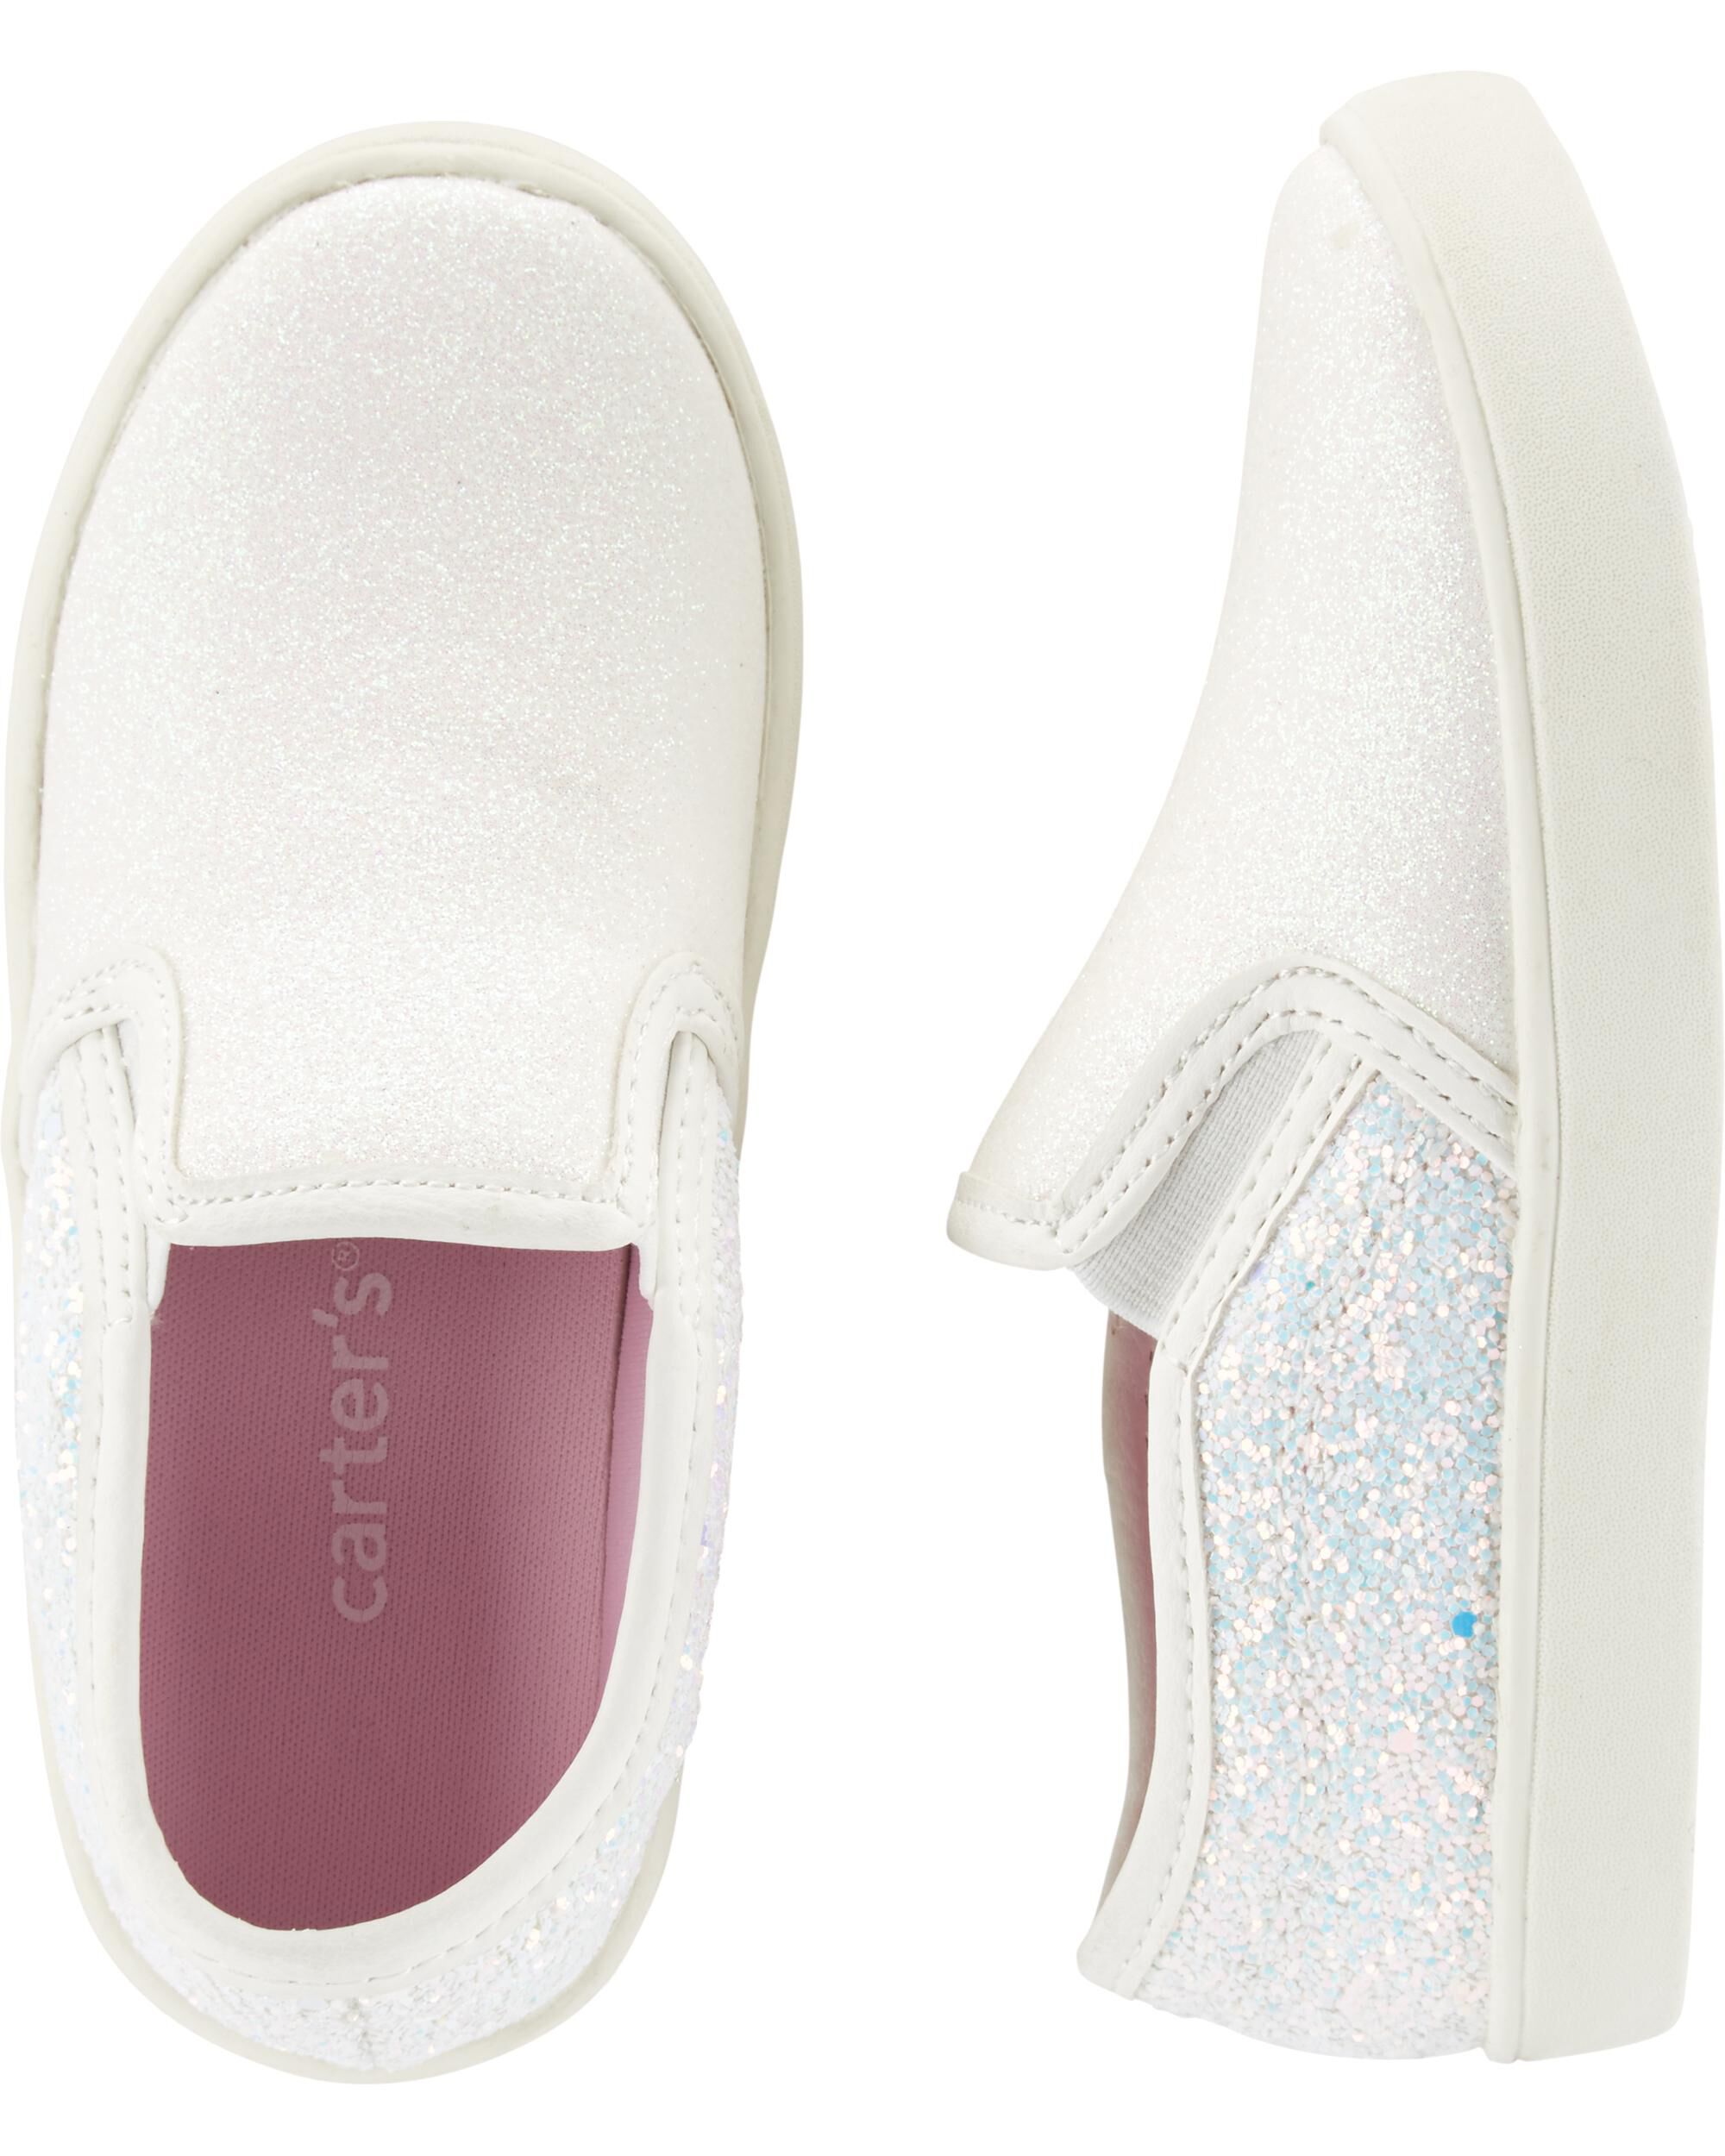 carter's glitter casual sneakers